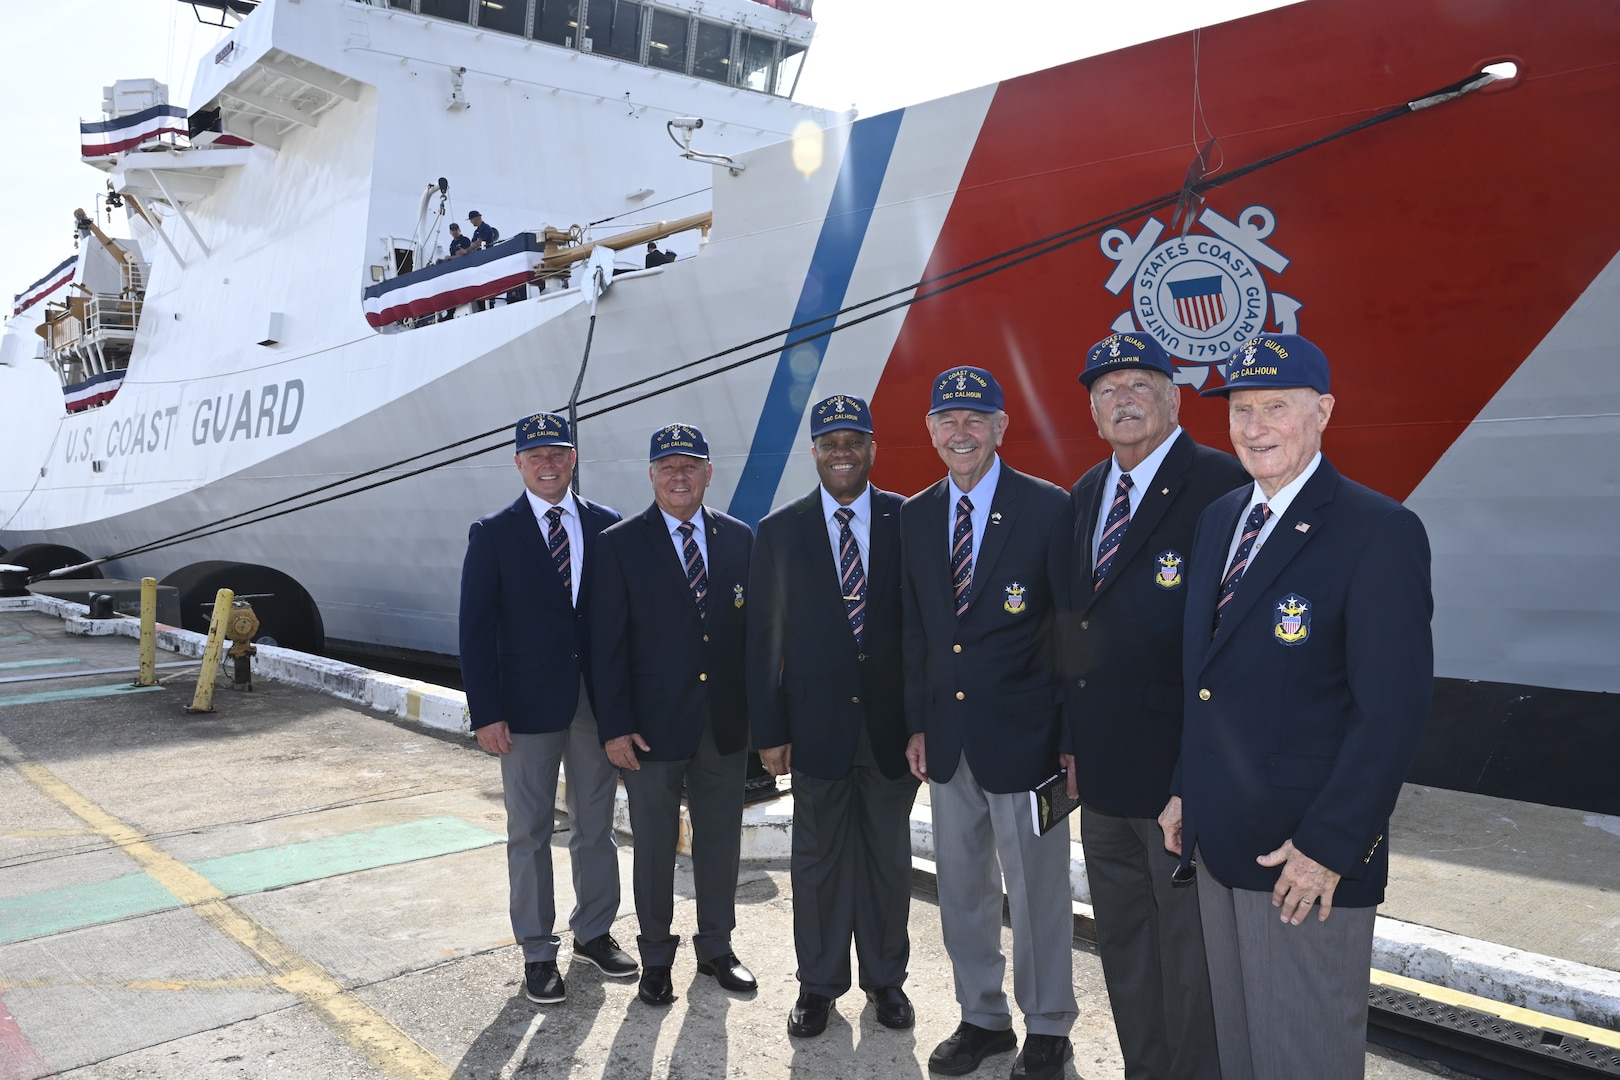 Former Master Chief Petty Officers of the Coast Guard stand in front of the Coast Guard Cutter Calhoun (WMSL 759), which is named for the first Master Chief Petty Officer of the Coast Guard (MCPOCG), Charles Calhoun, April 20, 2024, in North Charleston, South Carolina. From left, MCPOCG #13 Jason Vanderhaden, MCPOCG #10 Skip Bowen, MCPOCG #8 Vince Patton, MCPOCG #7 Eric Trent, MCPOCG #6 Jay Lloyd, and MCPOCG #3 Hollis Stephens. (U.S. Coast Guard photo by Senior Chief Petty Officer Nick Ameen)